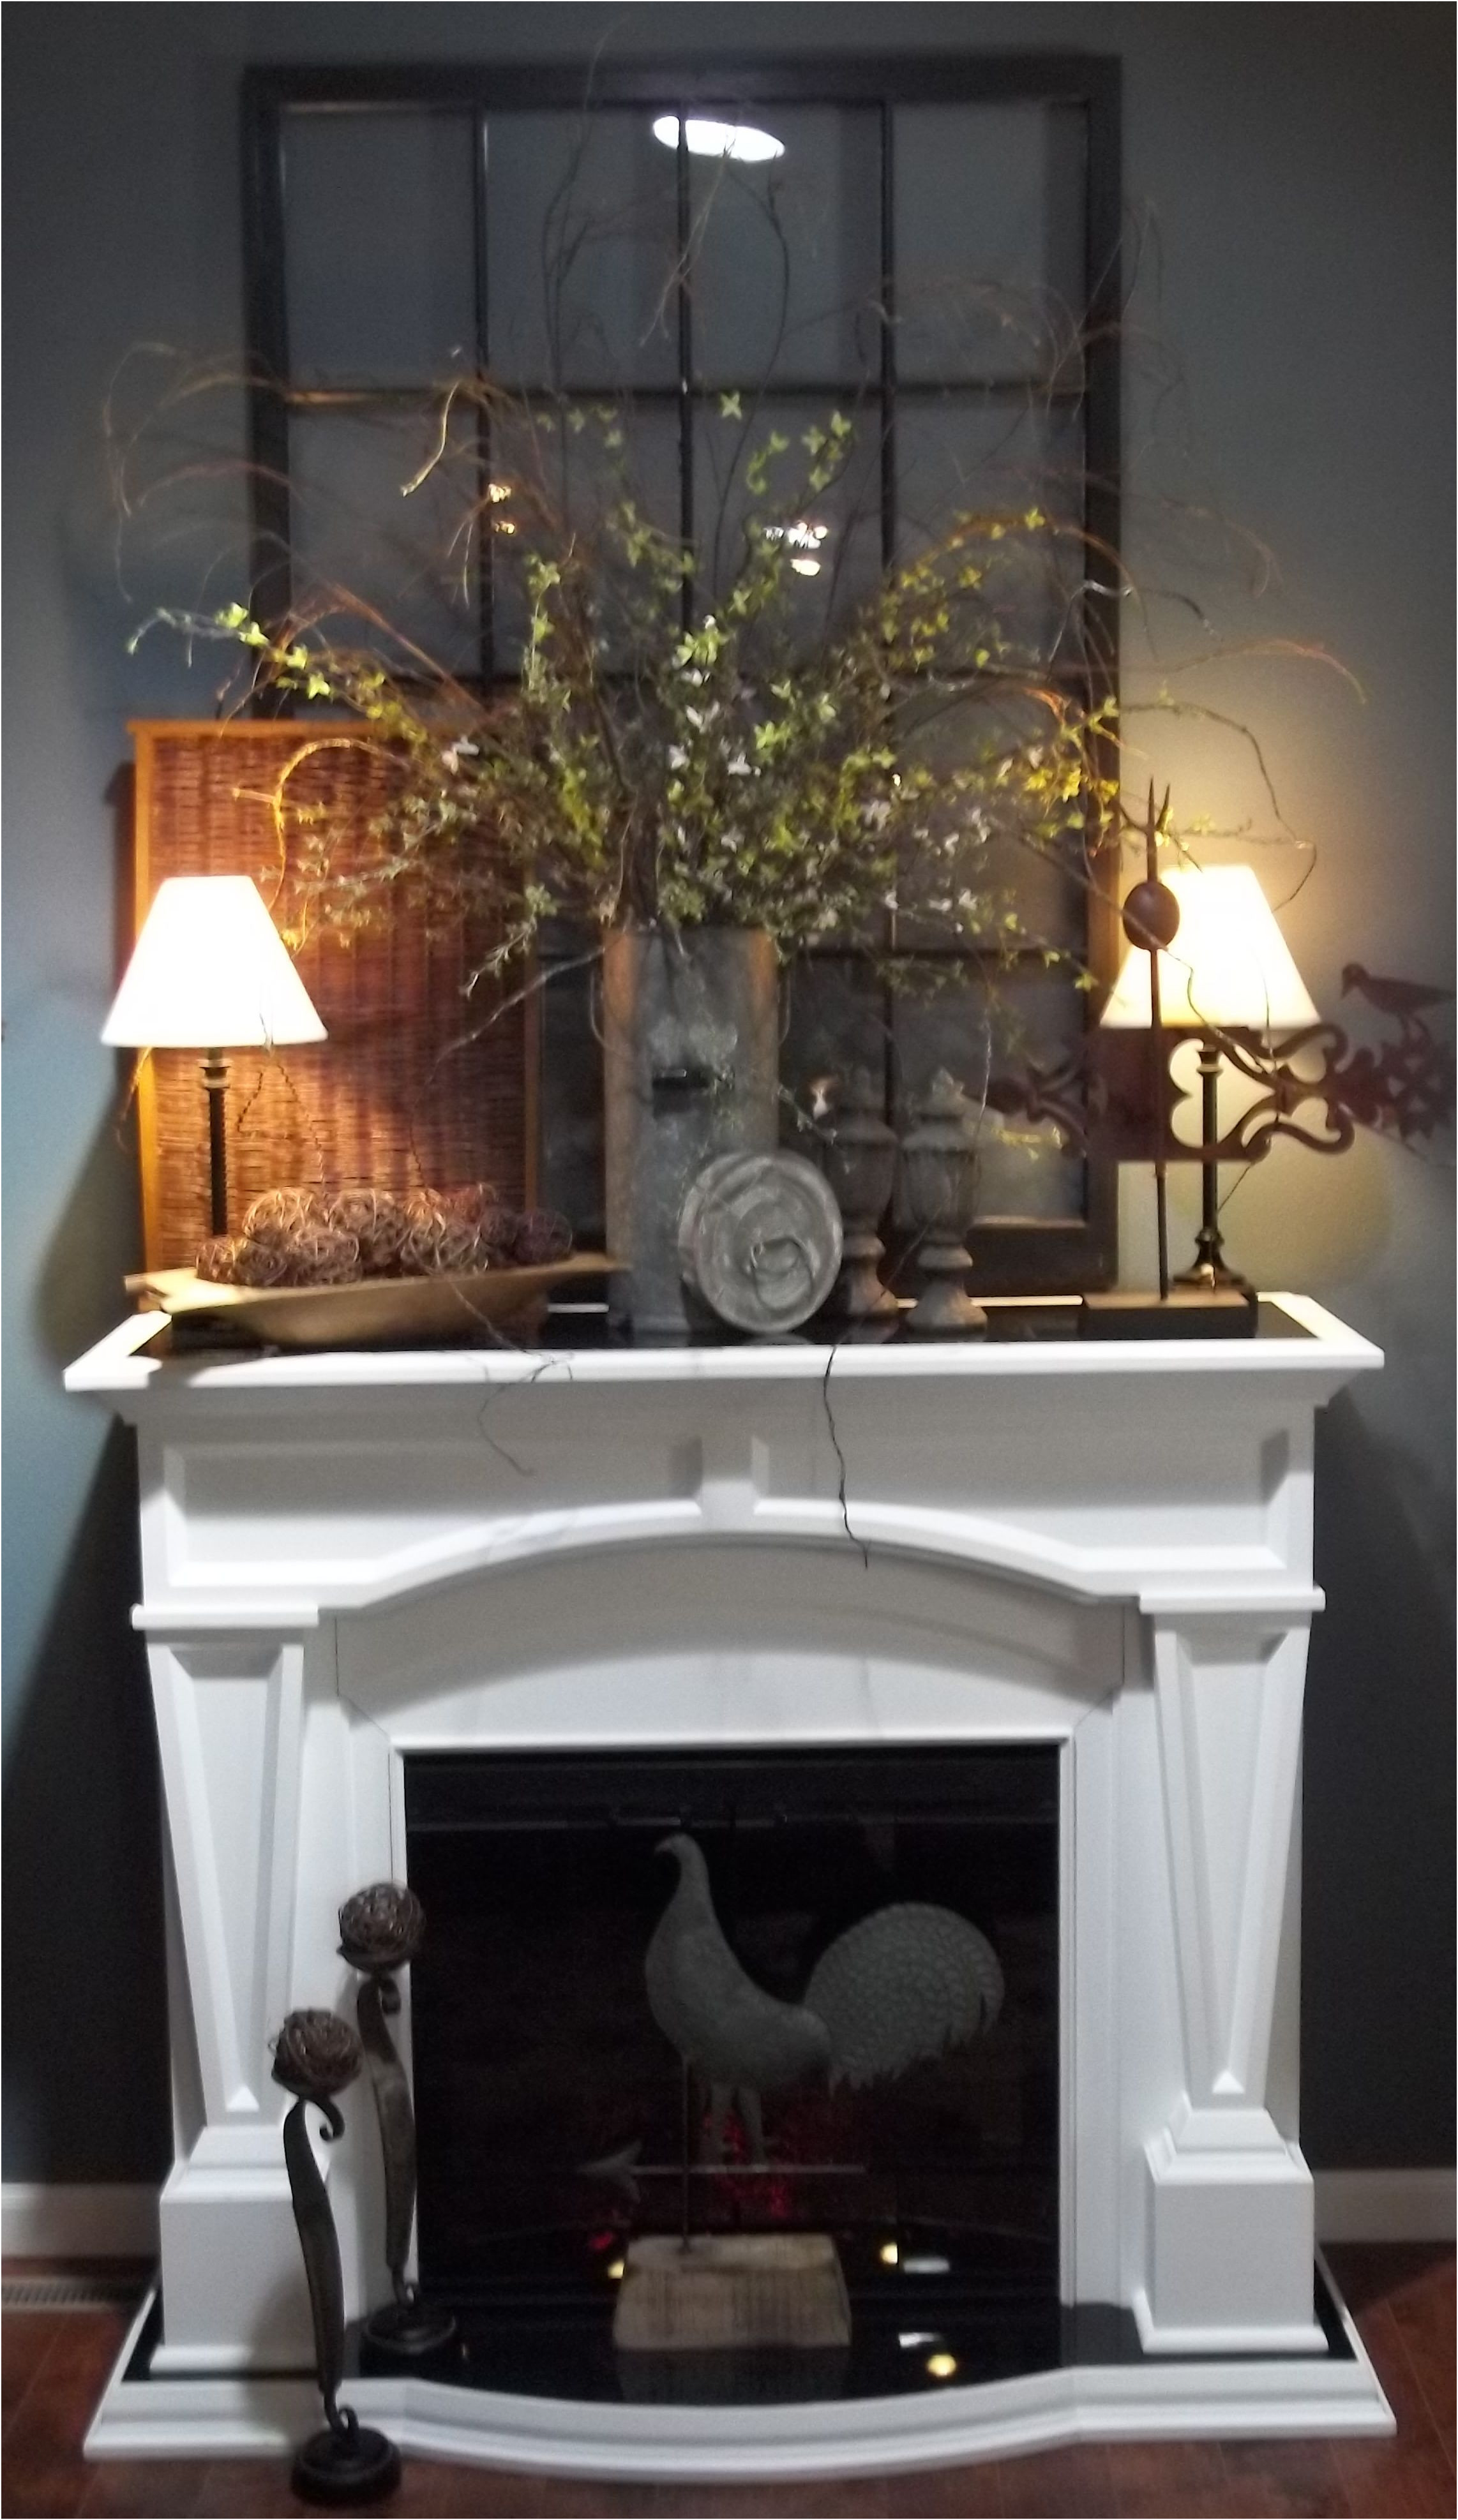 New Mantel Decor Ideas for Fireplace